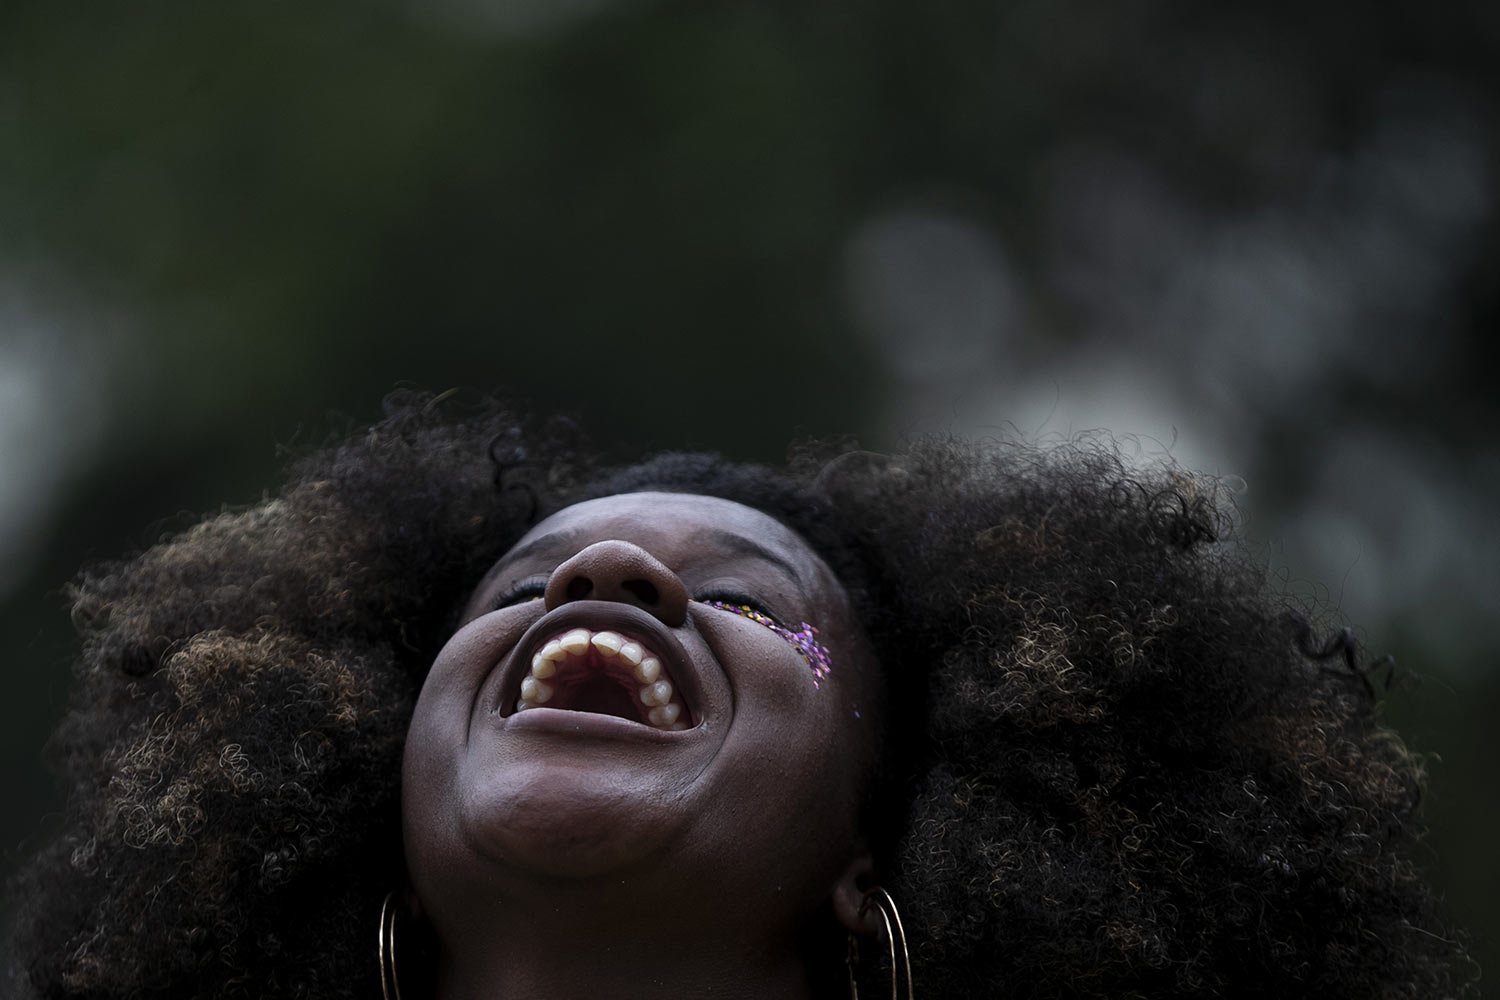  A person attends the street carnival parade put on by the "Bloconce" block, a female group referencing U.S. singer Beyonce, at the unofficial start of Carnival in Rio de Janeiro, Brazil, Jan. 8, 2023. (AP Photo/Bruna Prado) 